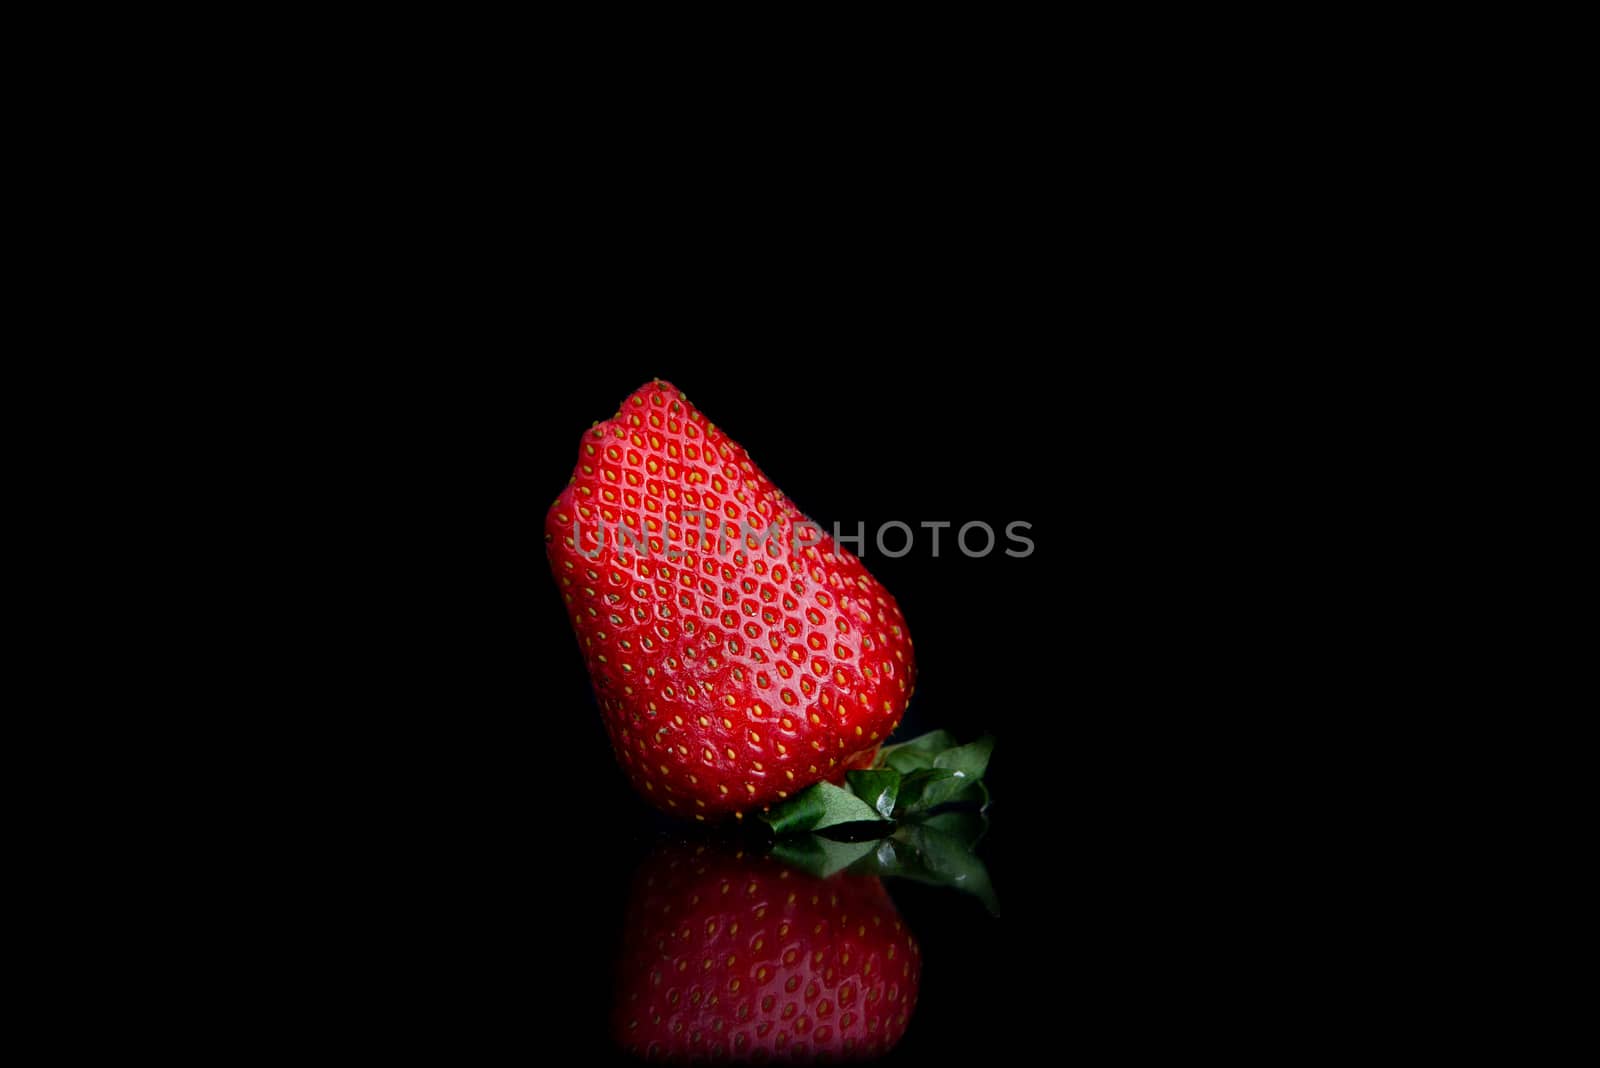 Giant fresh strawberries on a black background with copy space by marynkin